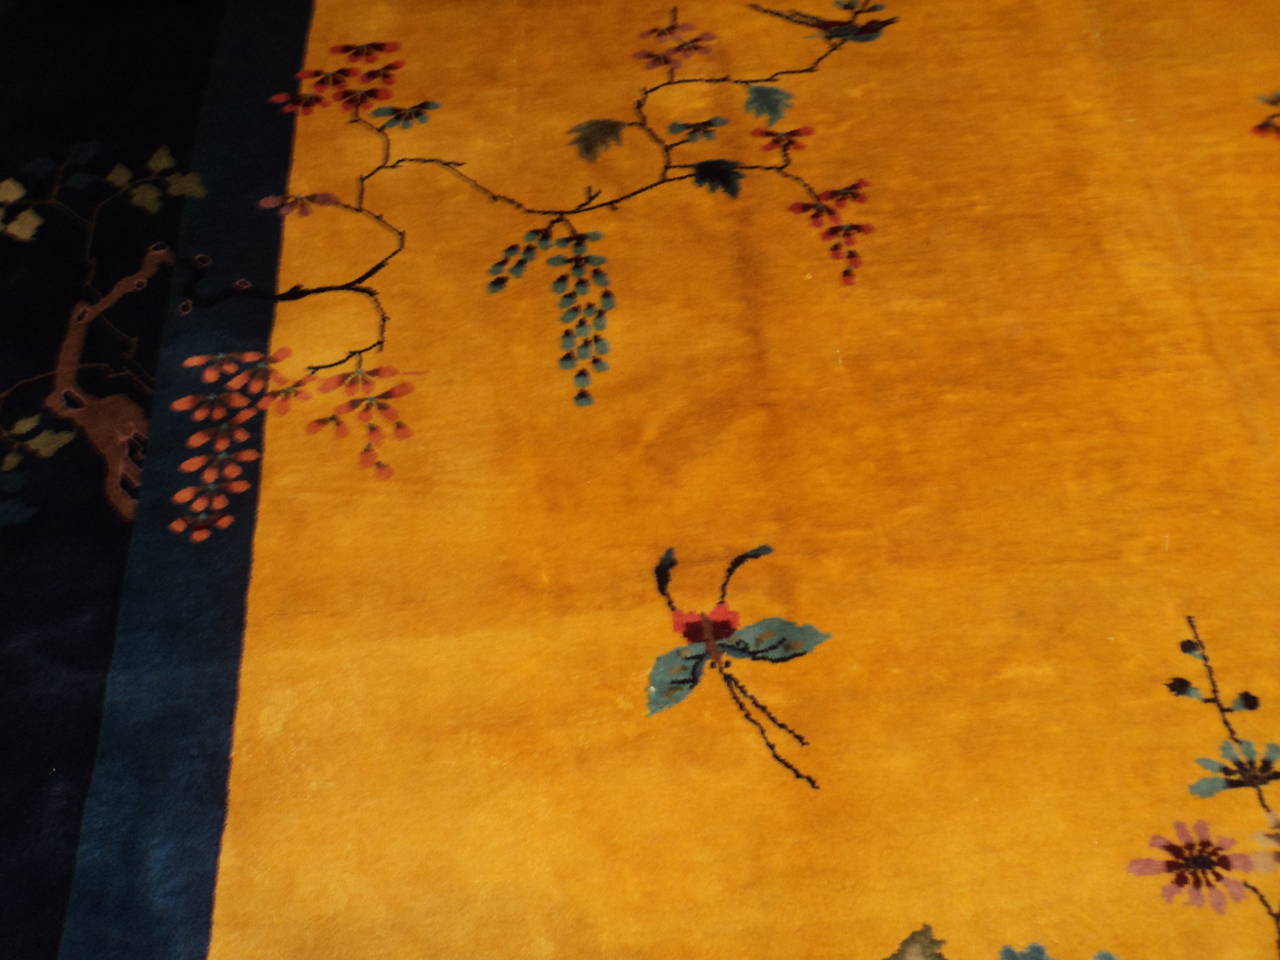 This circa 1920 Mandarin Chinese Art Deco Oriental Rug (INV 7541) measures 10’0” X 13’3” (304 x 405 cm). It has a yellow gold field with a floral motif in purple, three shades of blue, maroon, black and touches of green. The motif comes in from the